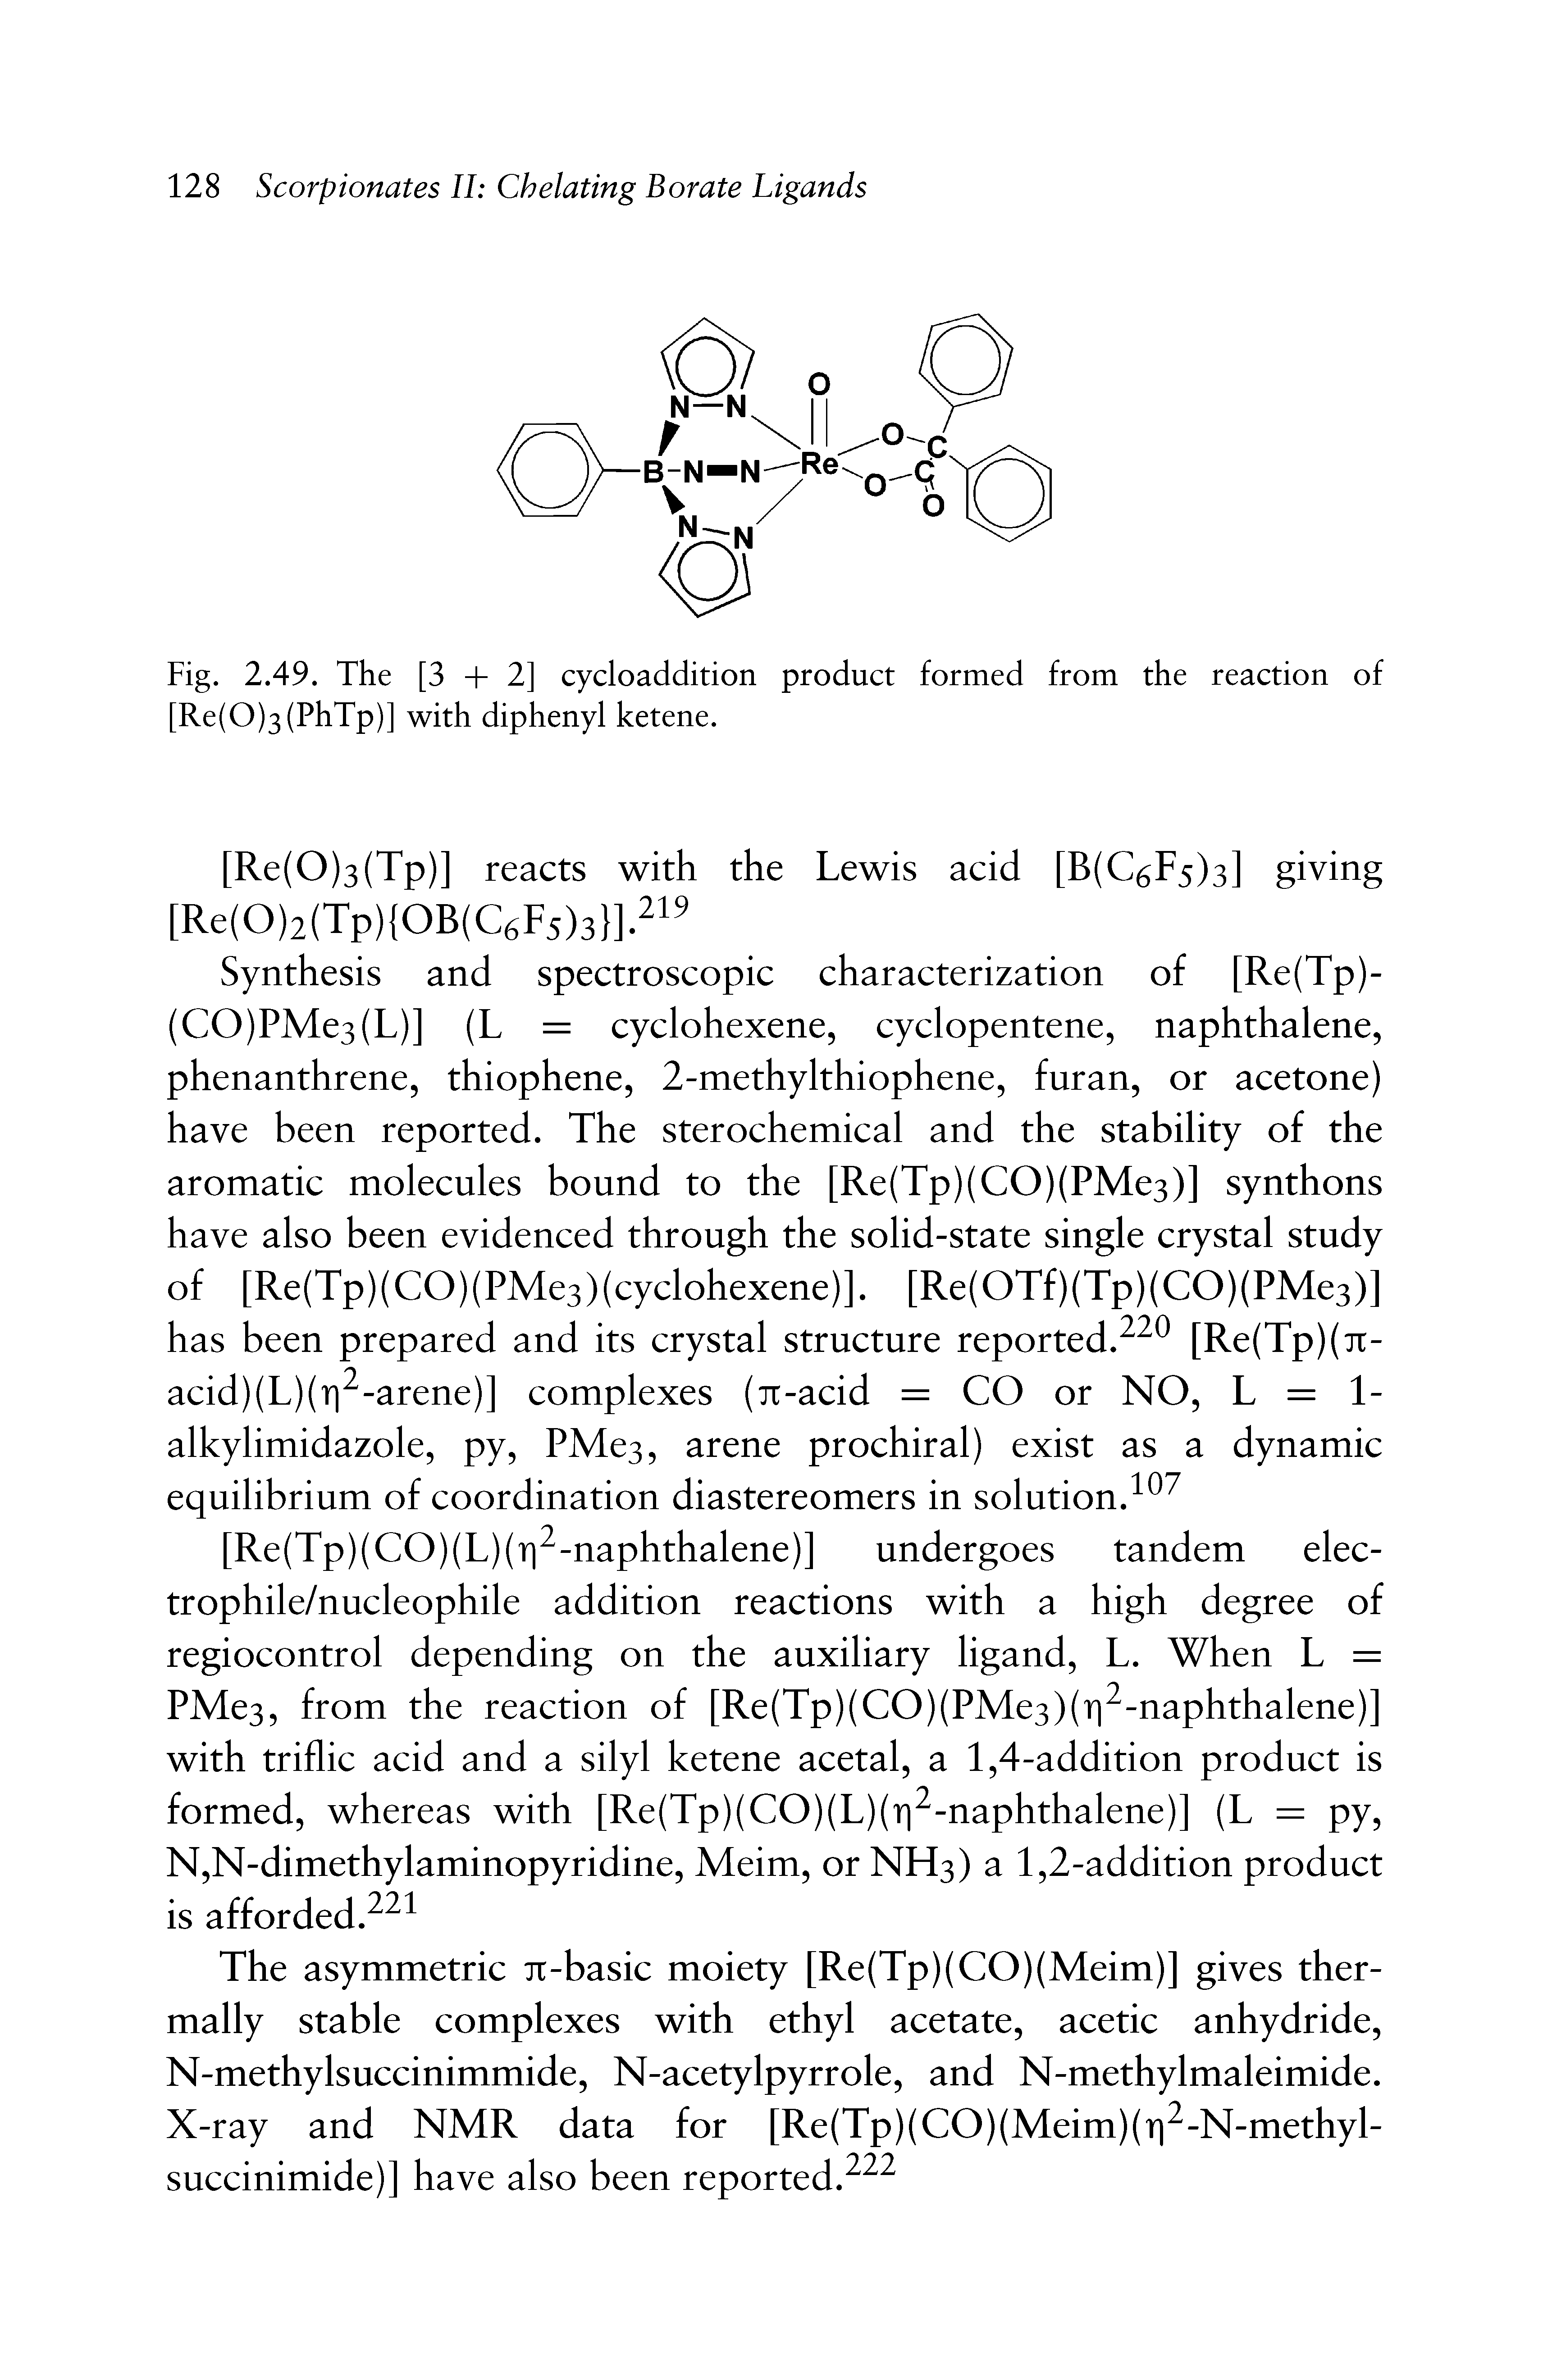 Fig. 2.49. The [3 + 2] cycloaddition product formed from the reaction of [Re(0)3(PhTp)] with diphenyl ketene.